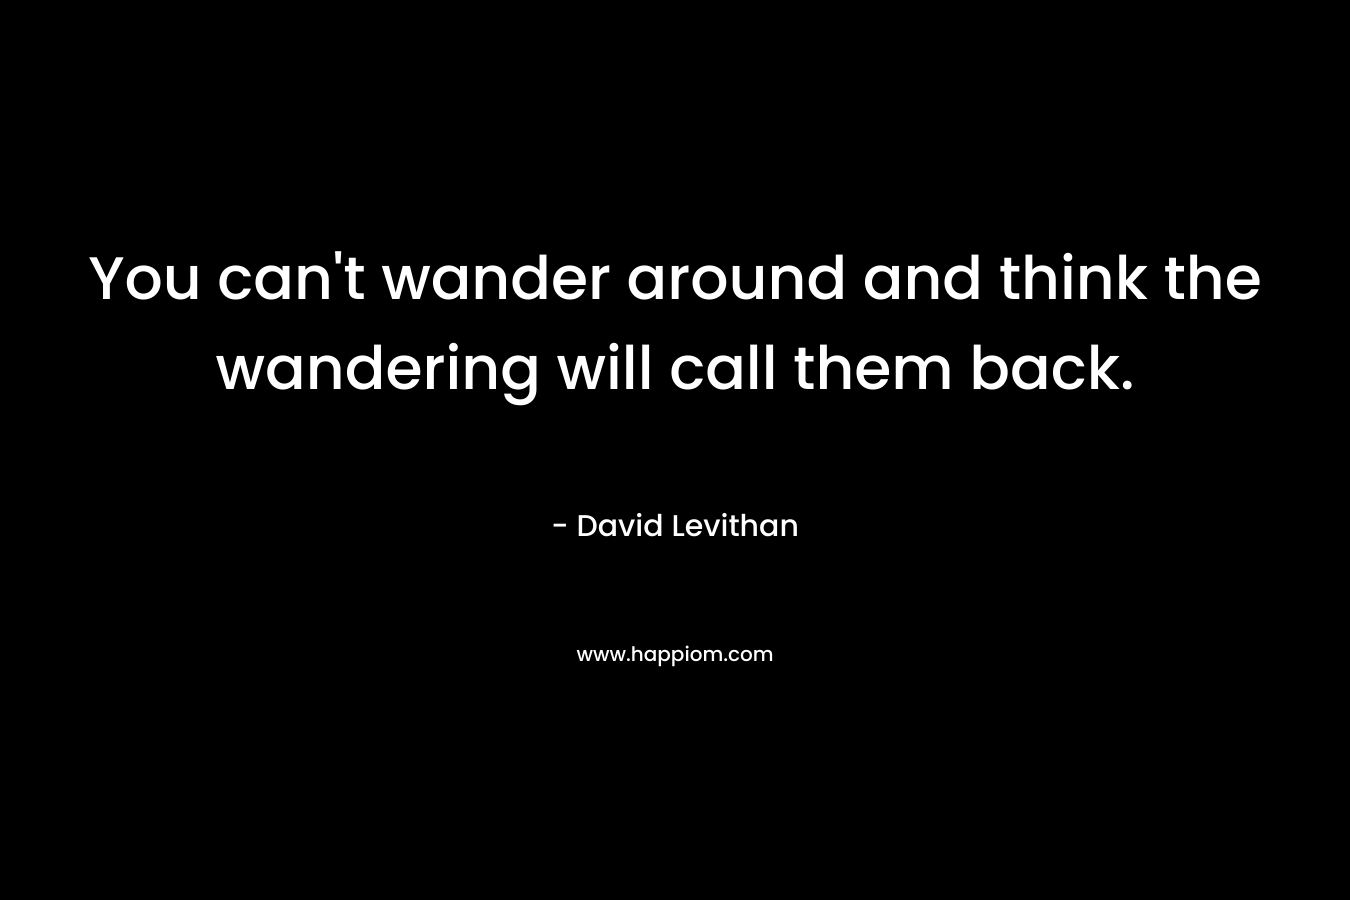 You can’t wander around and think the wandering will call them back. – David Levithan